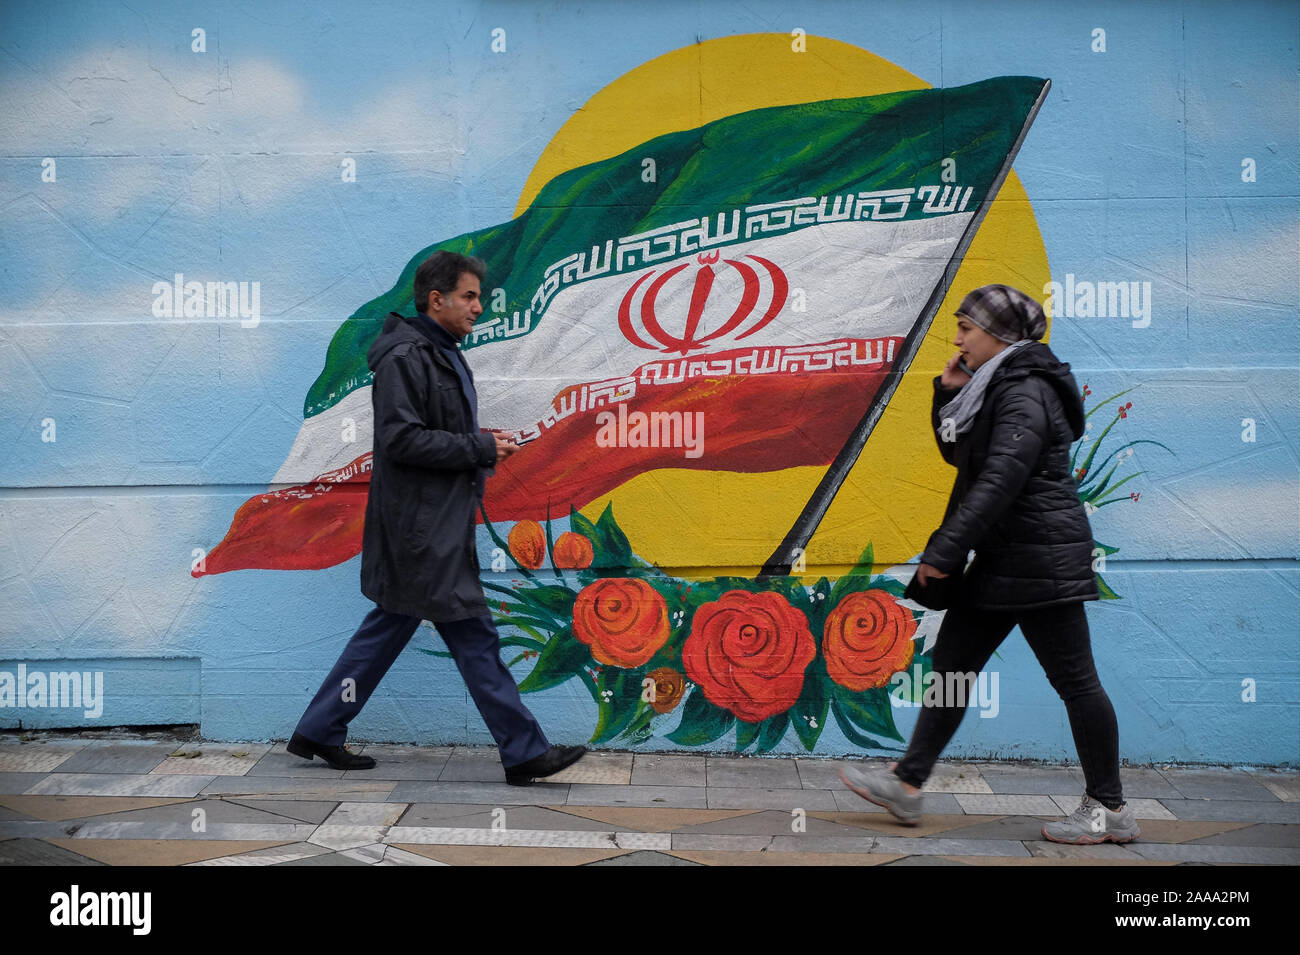 Tehran, Iran. 20th Nov, 2019. Iranians walk next to a wall painting of the Iranian national flag in Tehran, Iran. Iran on 15 November increased fuel prices by at least 50 percent prompting protests in different cities. President Hassan Rouhani said the country's people had defeated an ''enemy conspiracy'' behind a wave of violent street protests. Demonstrations erupted in sanctions-hit Iran last week after an announcement the price of petrol would be raised by as much as 200 percent, with motorists blocking major roads in Tehran before the unrest spread rapidly to at least 40 urban centers, Stock Photo